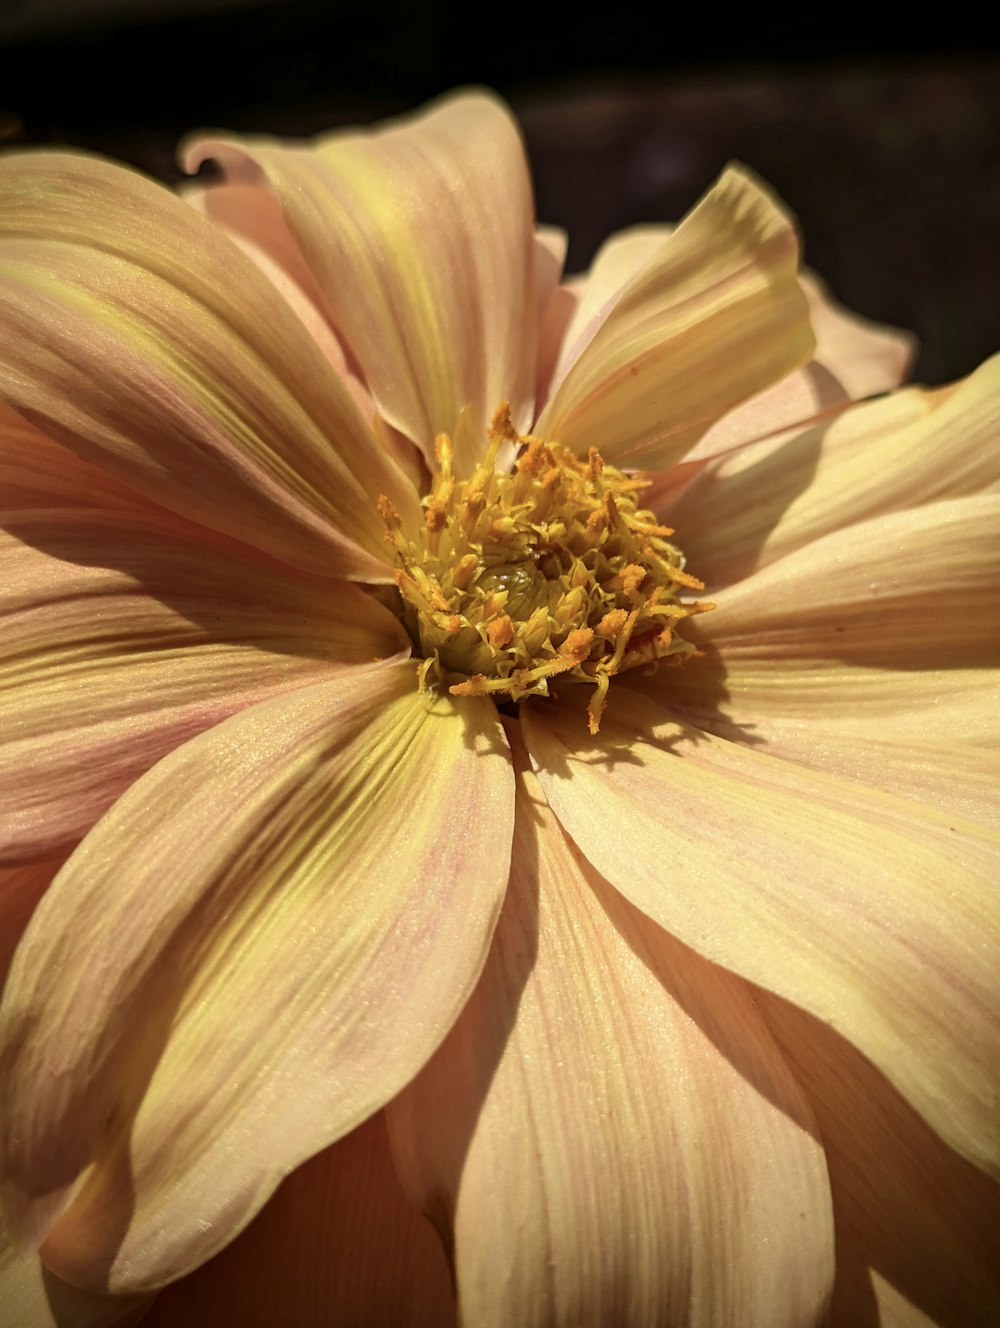 a large yellow flower with a yellow center